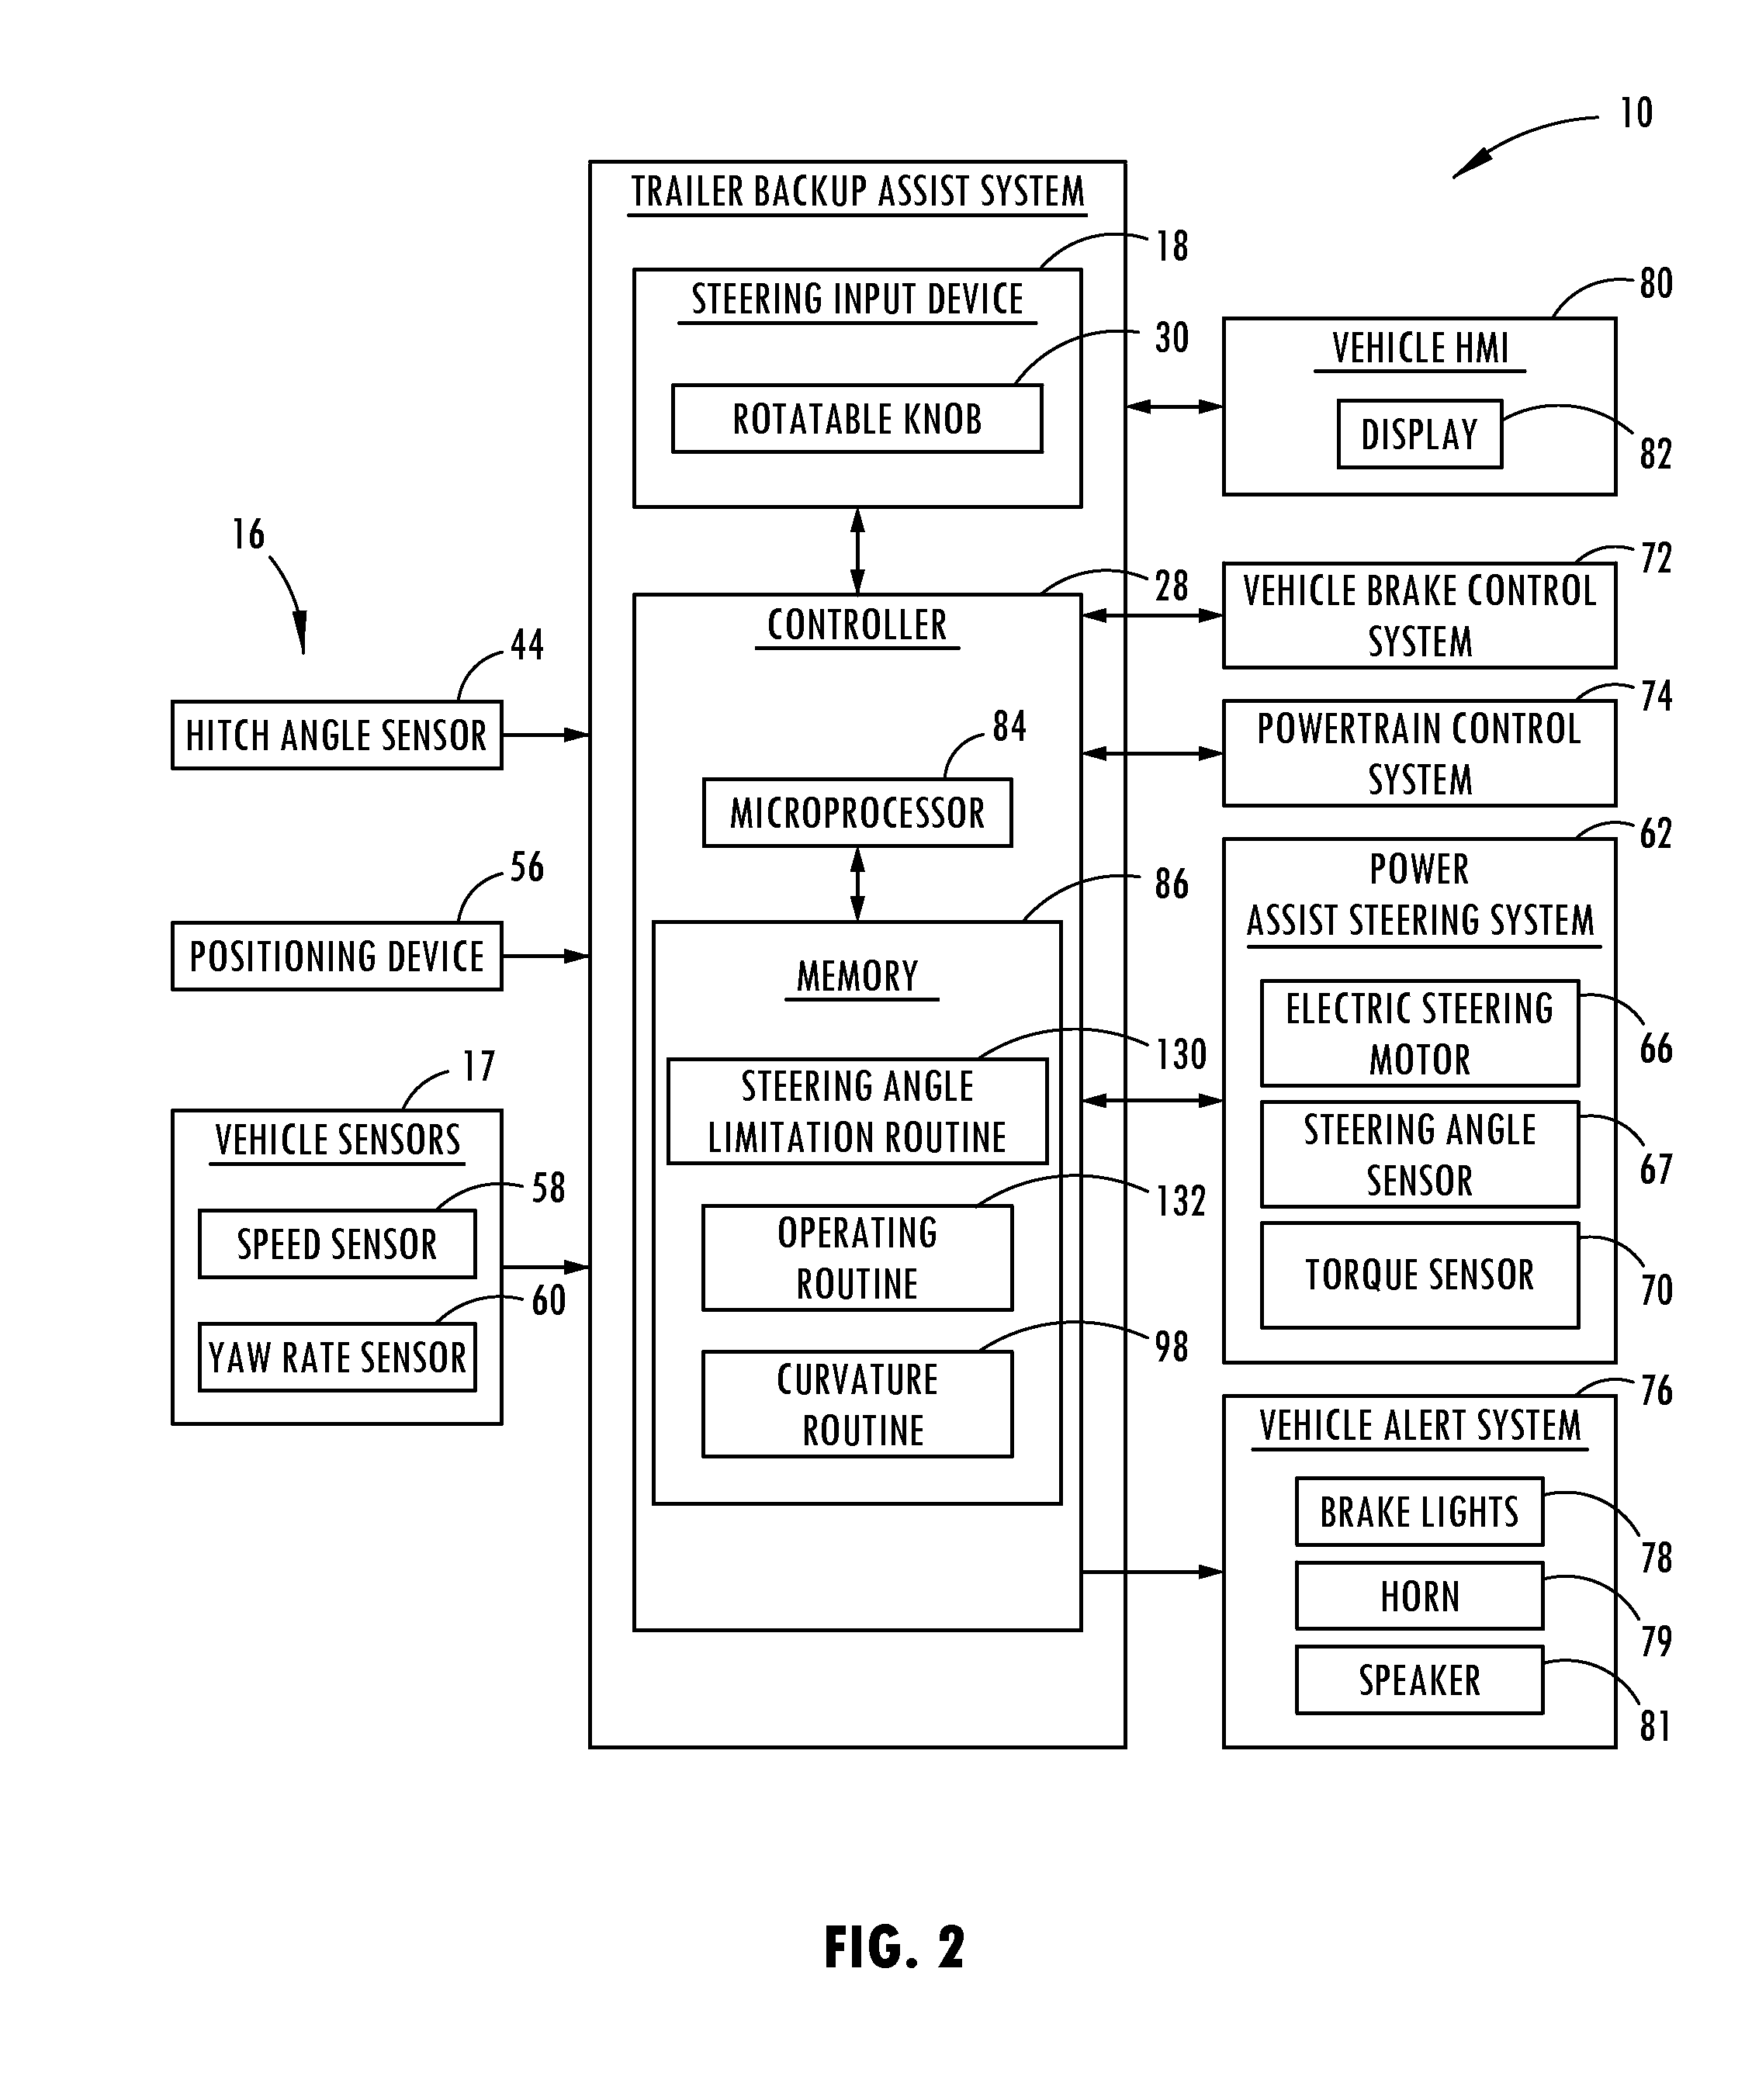 Steering angle control for multiple features